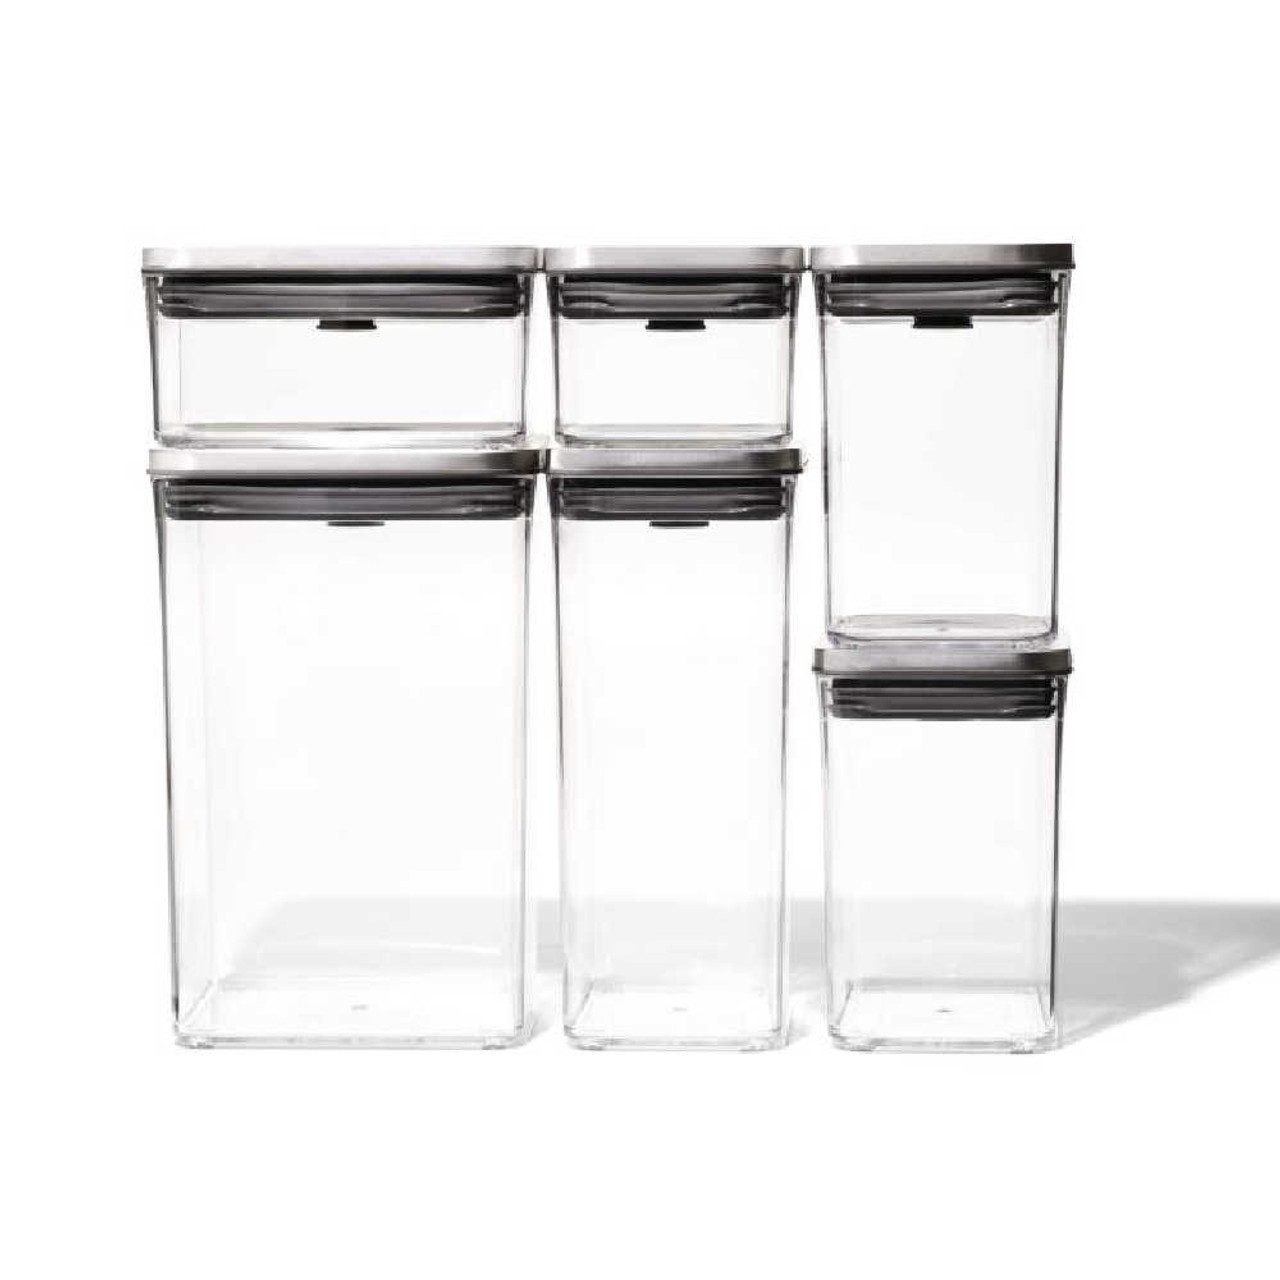 https://cdn11.bigcommerce.com/s-hccytny0od/images/stencil/1280x1280/products/4673/19075/OXO_Steel_6-Piece_POP_Container_Set_1__38270.1651616576.jpg?c=2?imbypass=on